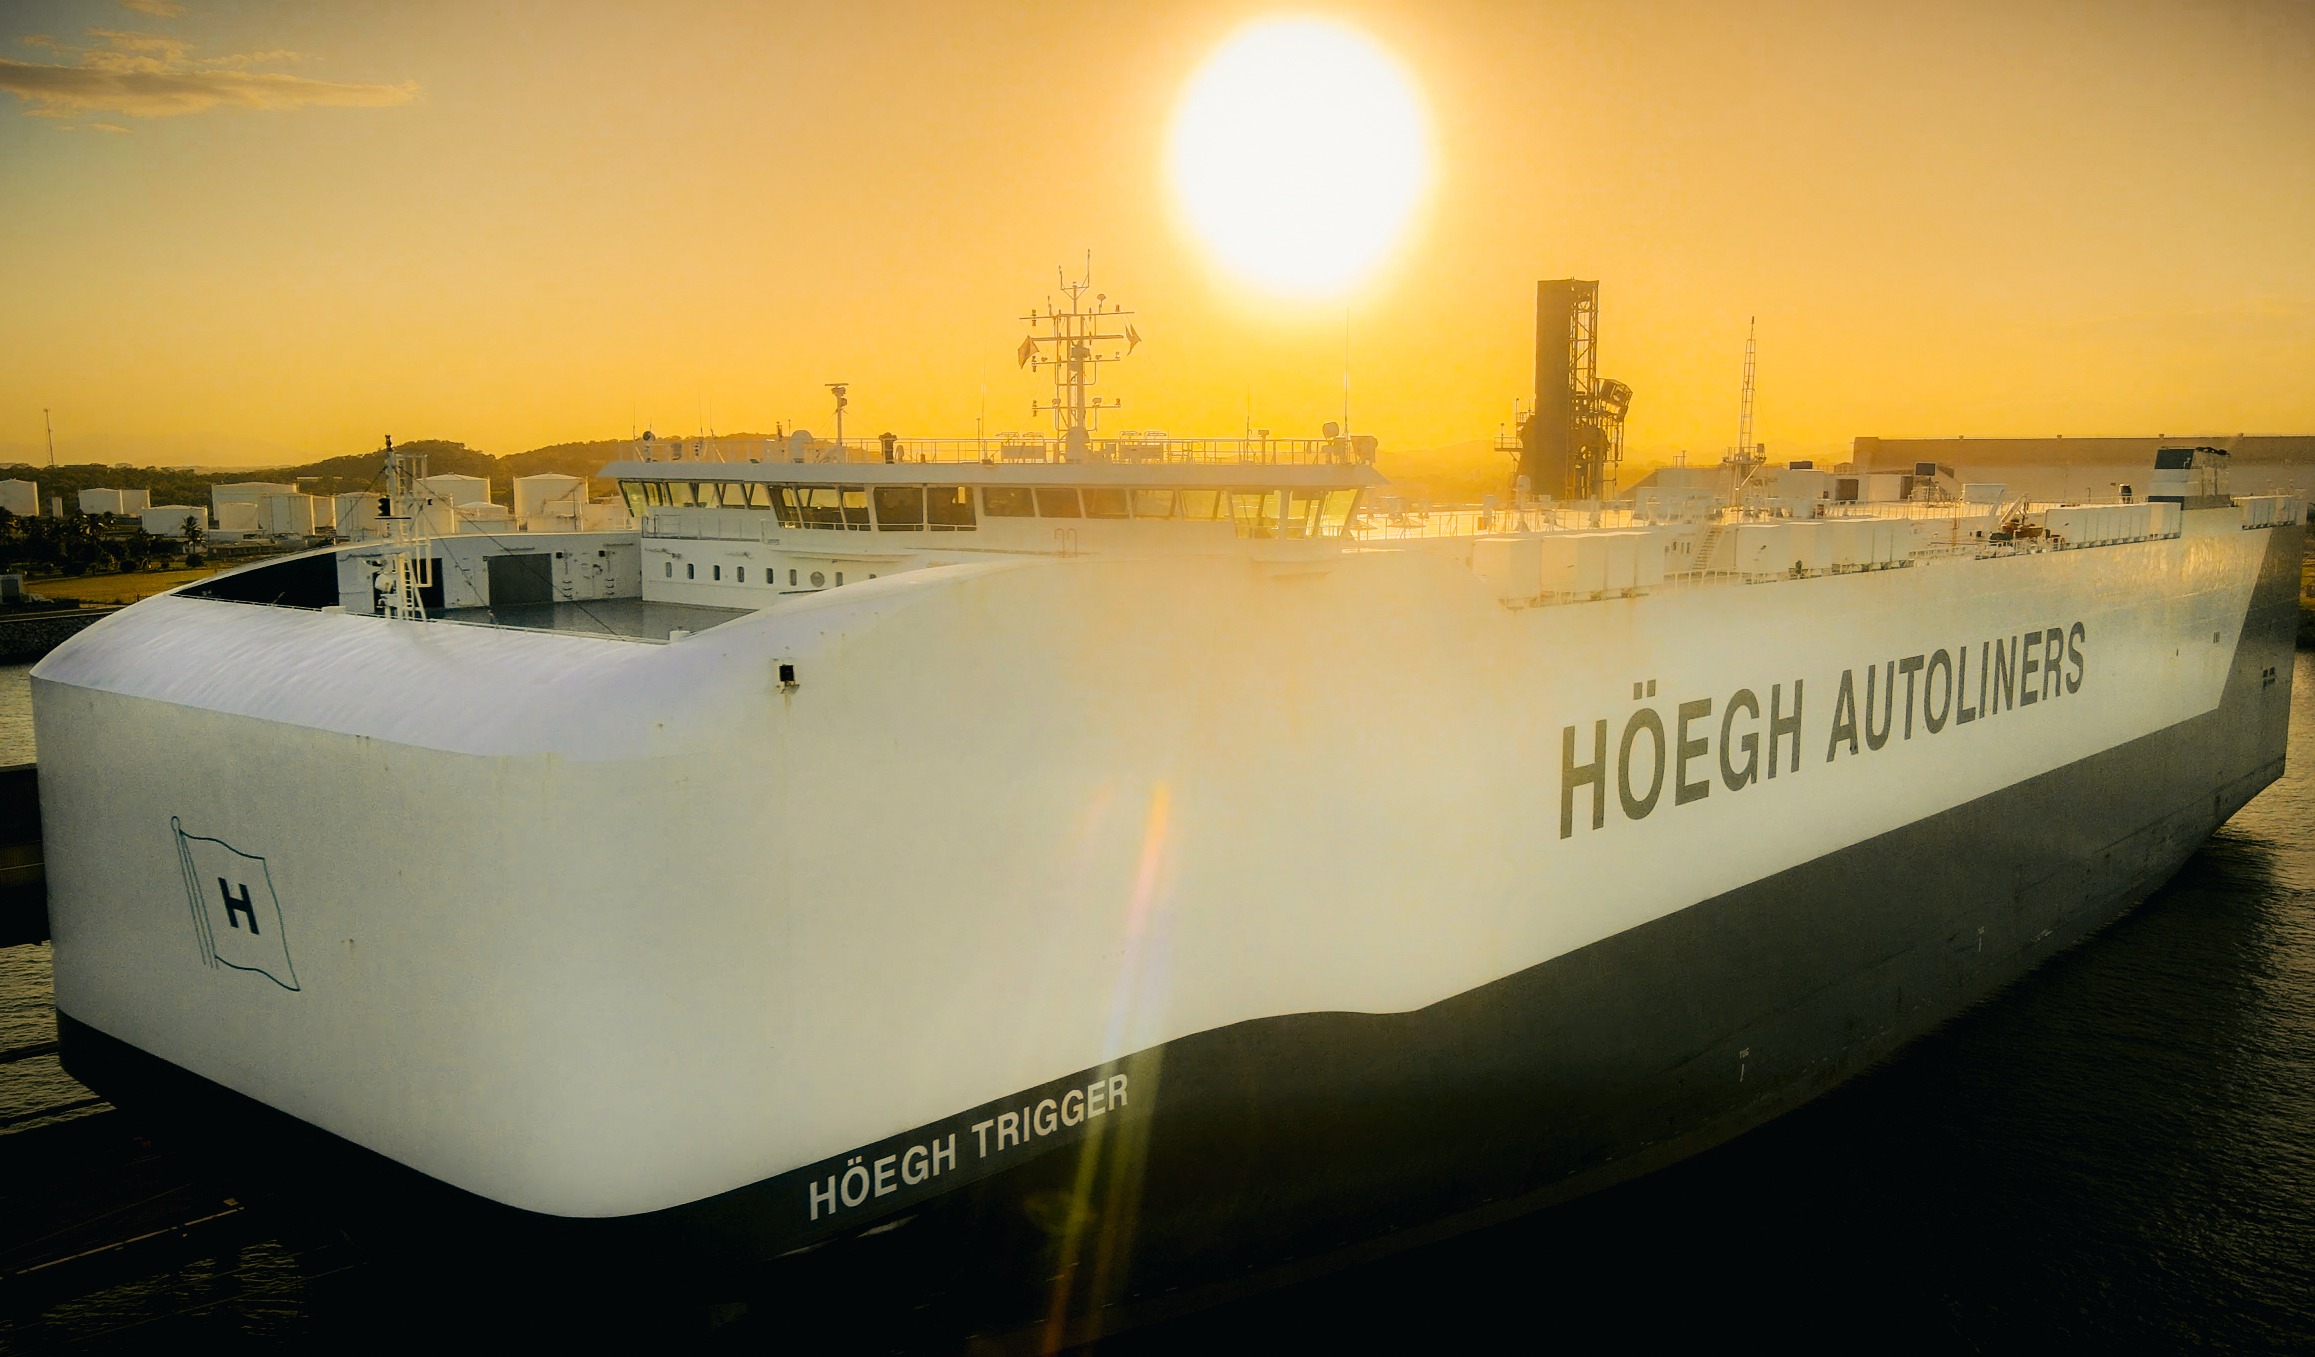 Hoegh Trigger berthed at the Port of Mackay.